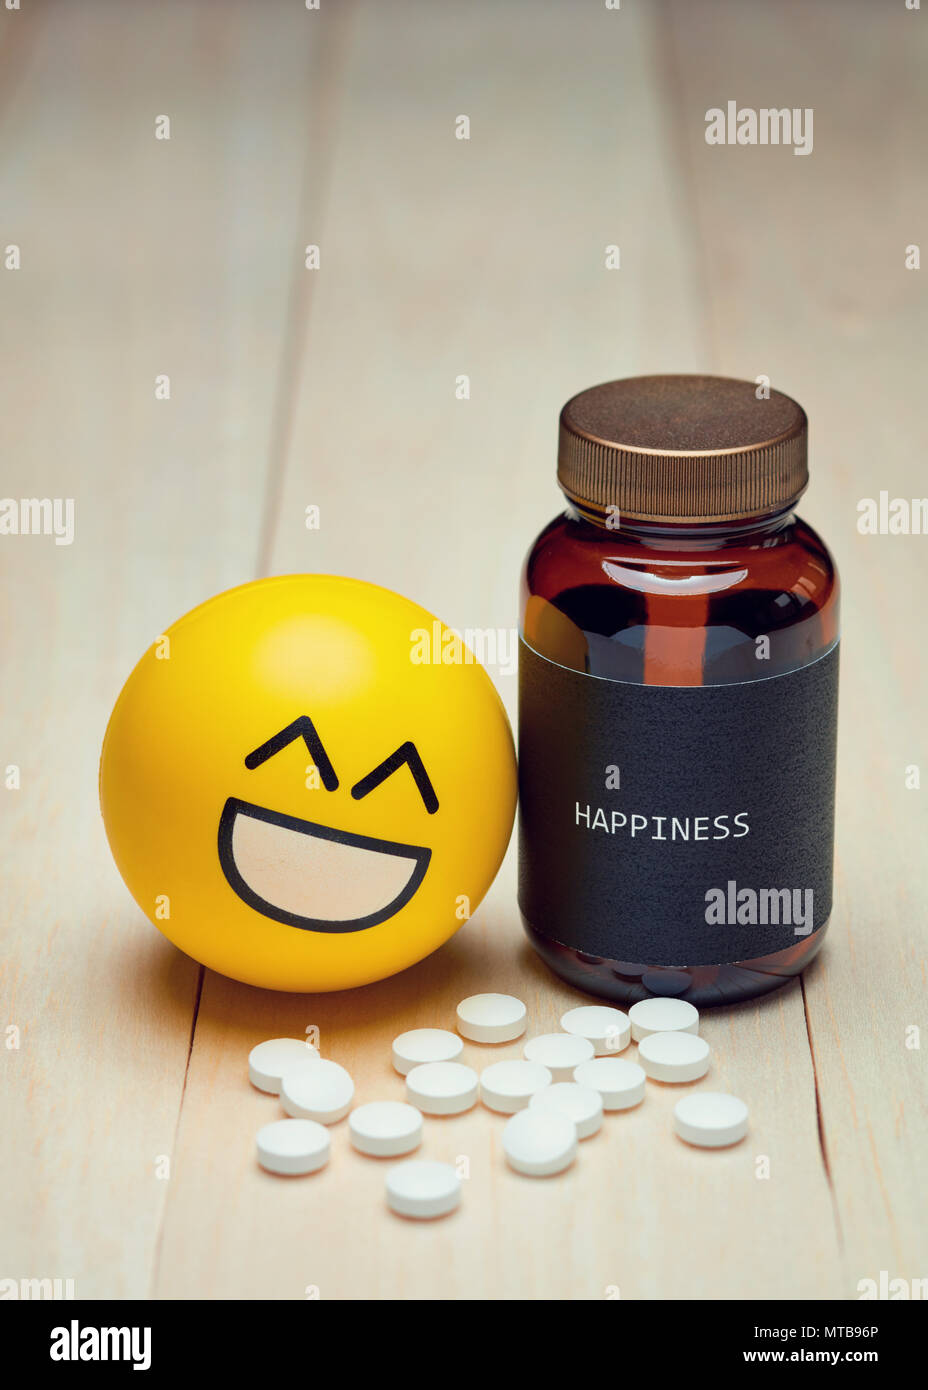 Anti-depressants and happiness. Yellow smiling emoji next to a drug container with a black label written happiness on it. White pills on the table. Stock Photo